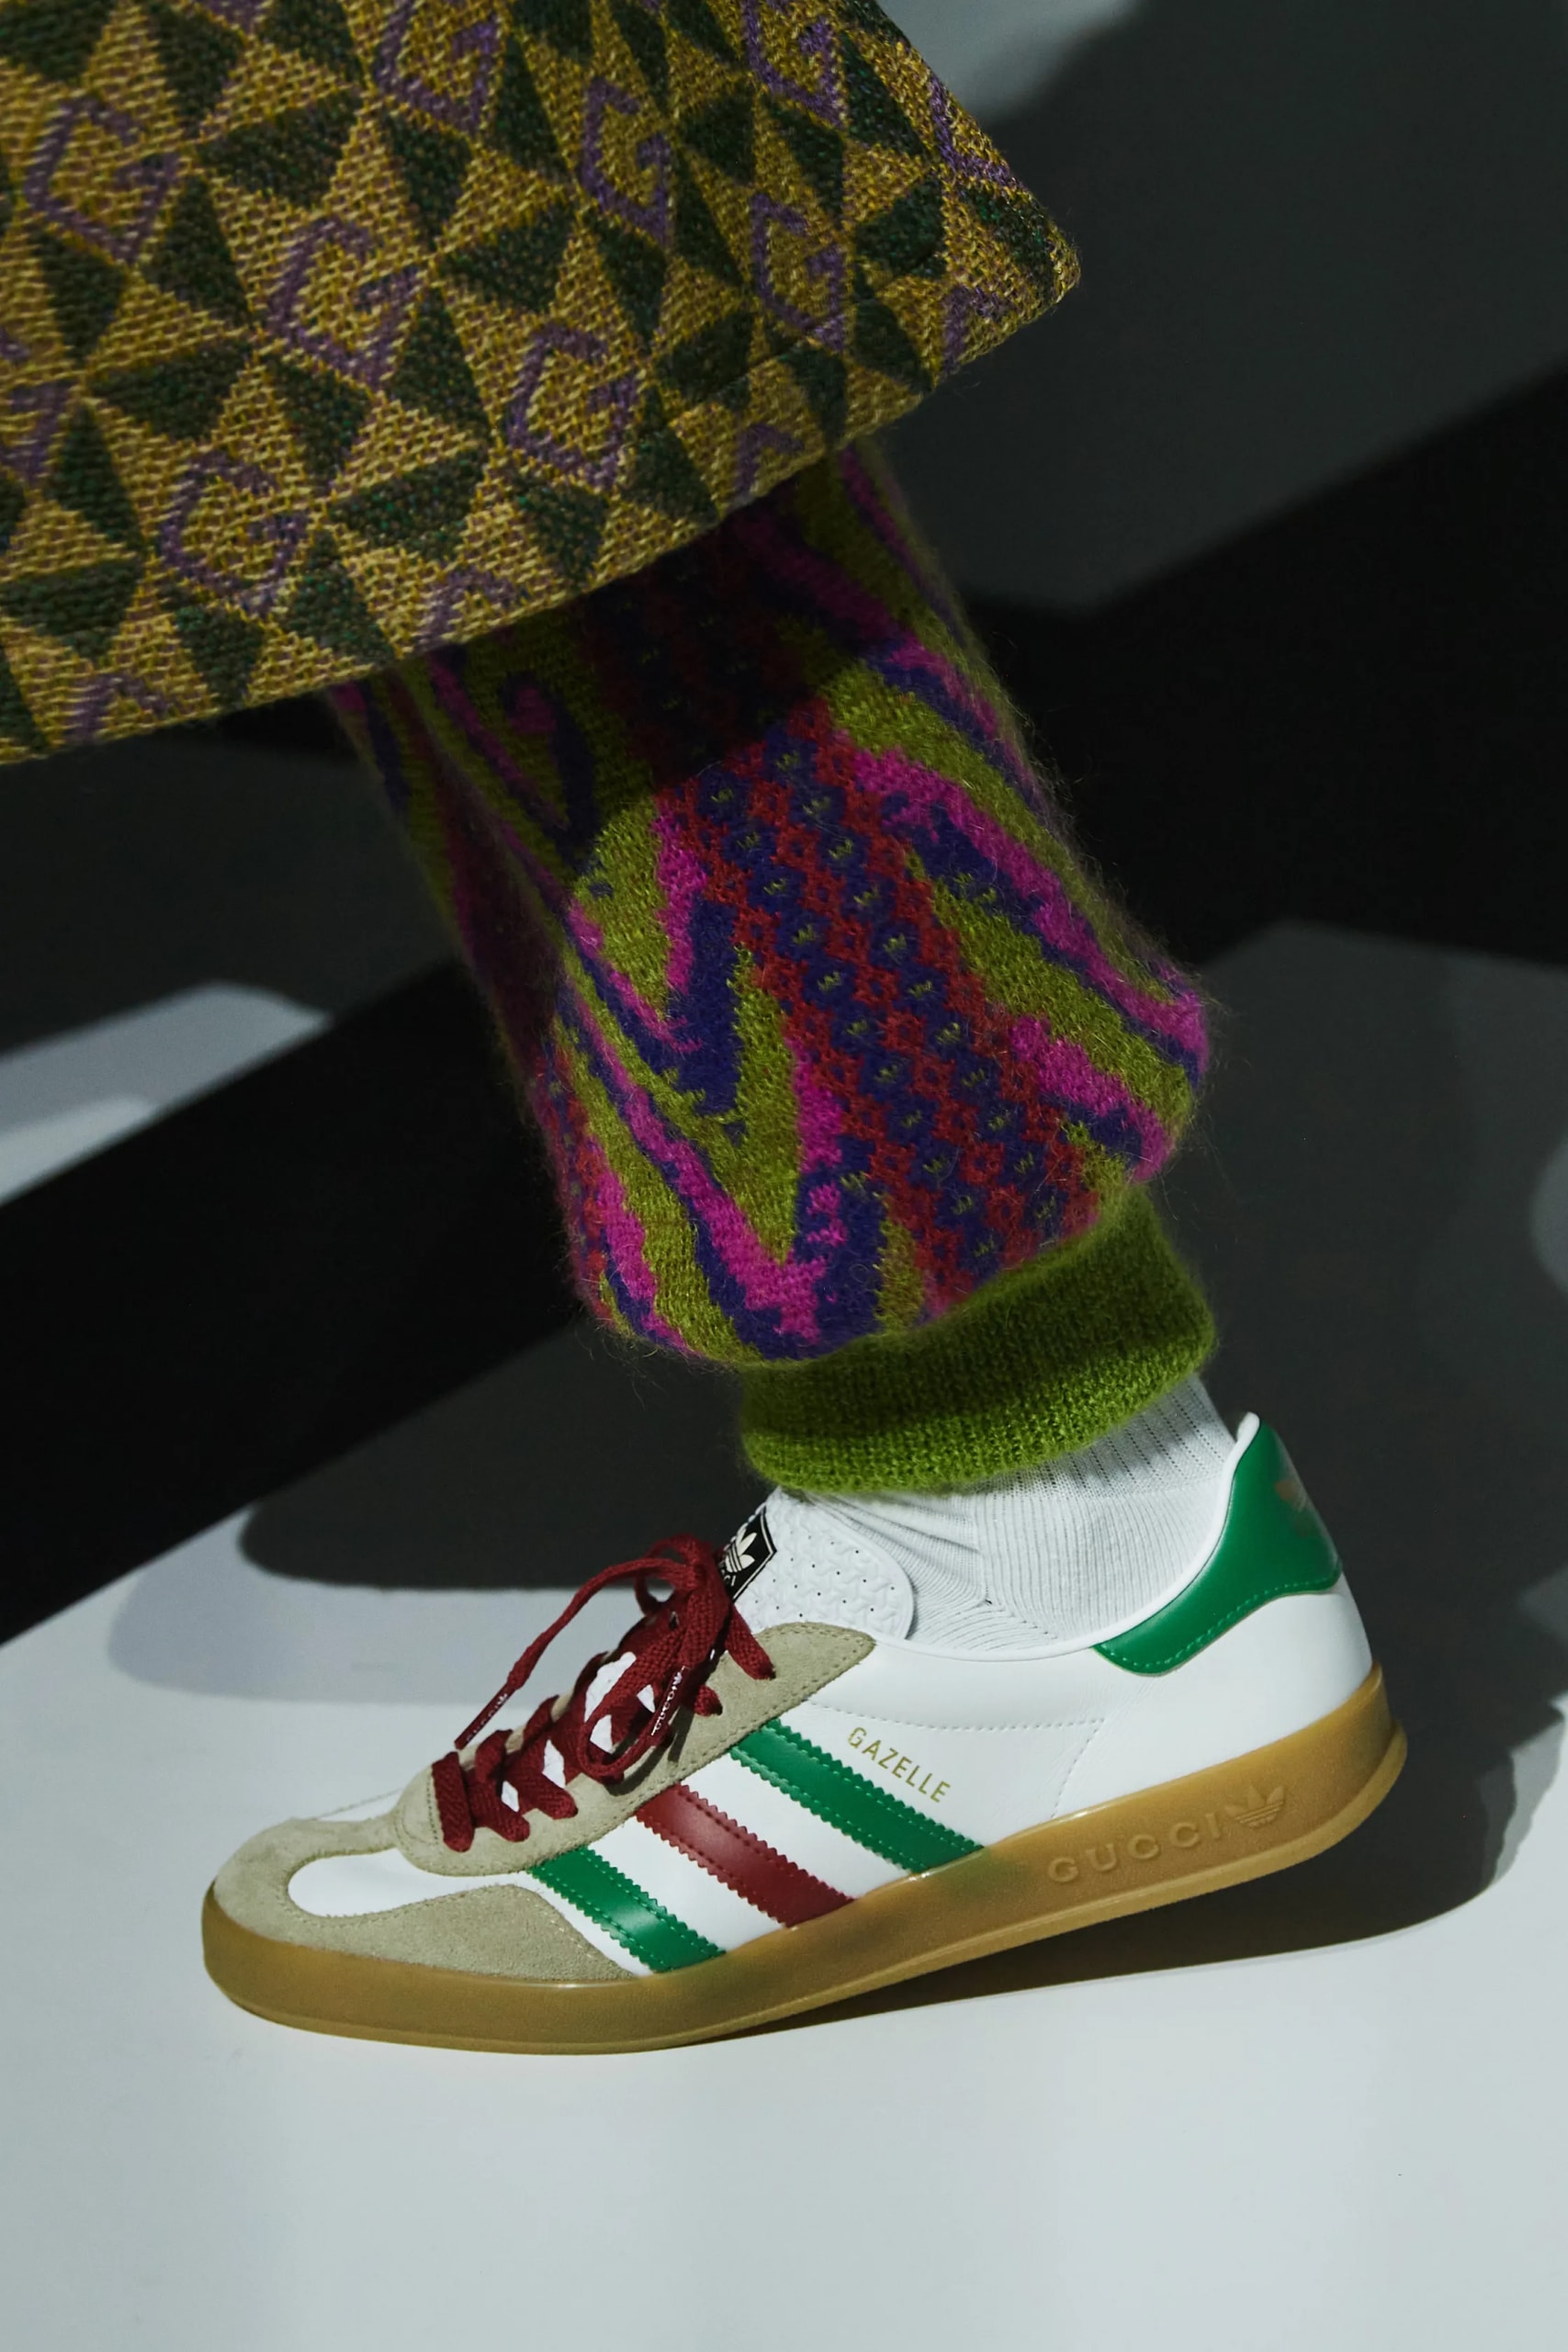 How to access exclusive adidas collaborations with Gucci